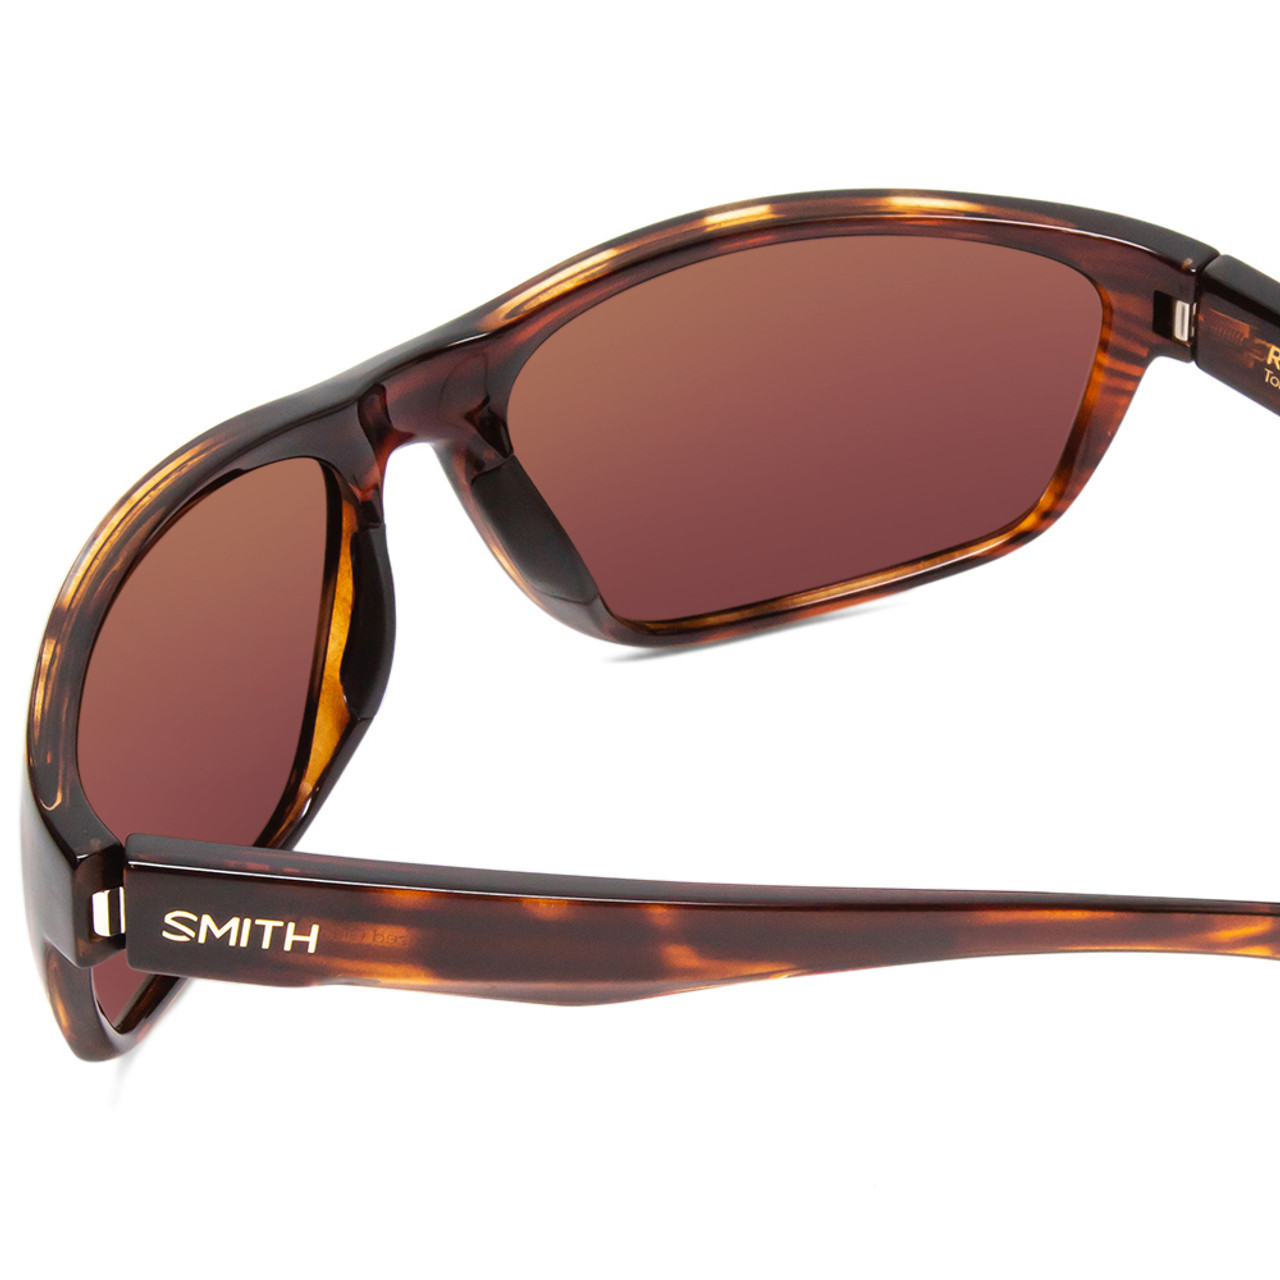 Close Up View of Smith Redding Wrap Sunglasses in Tortoise/CP Glass Polarized Green Mirror 62 mm